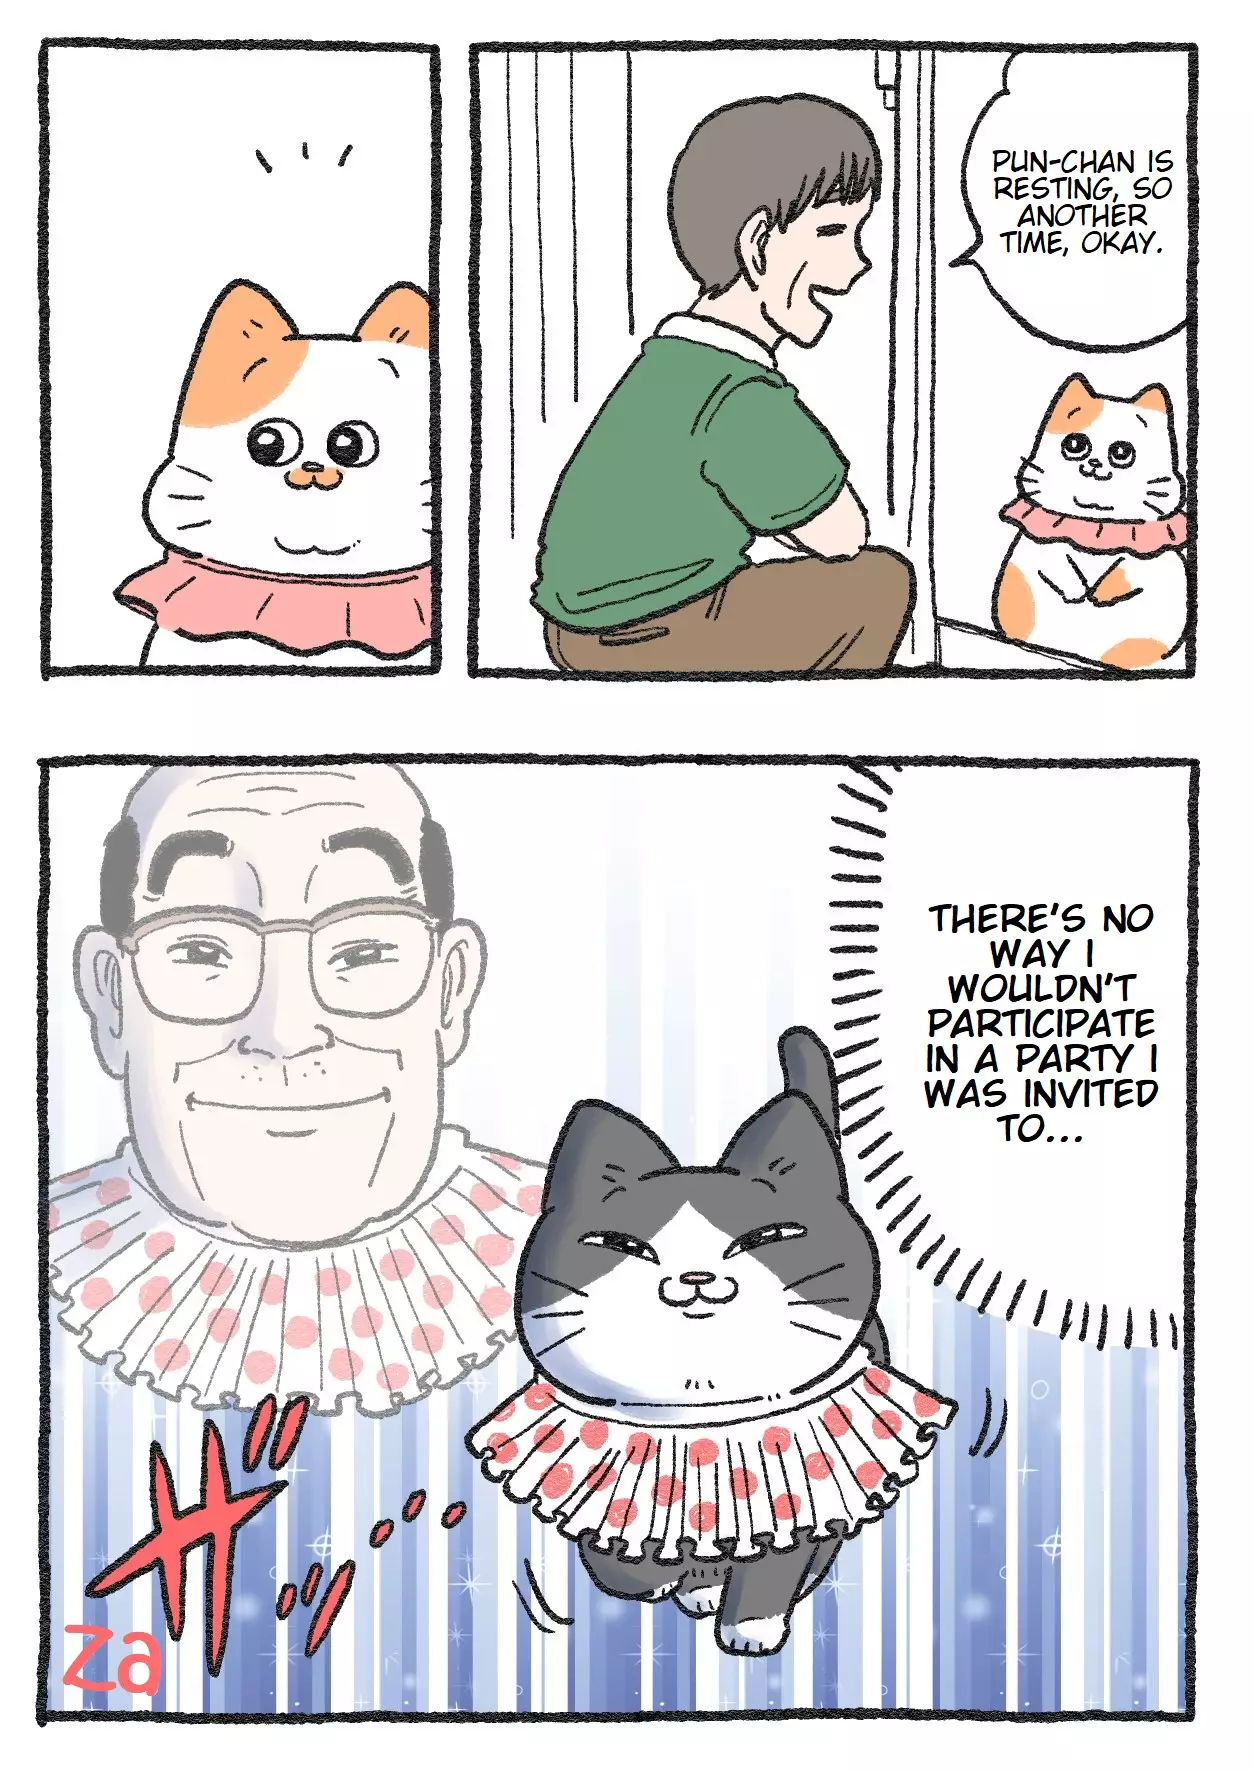 The Old Man Who Was Reincarnated As A Cat - 159 page 2-c1118a4c